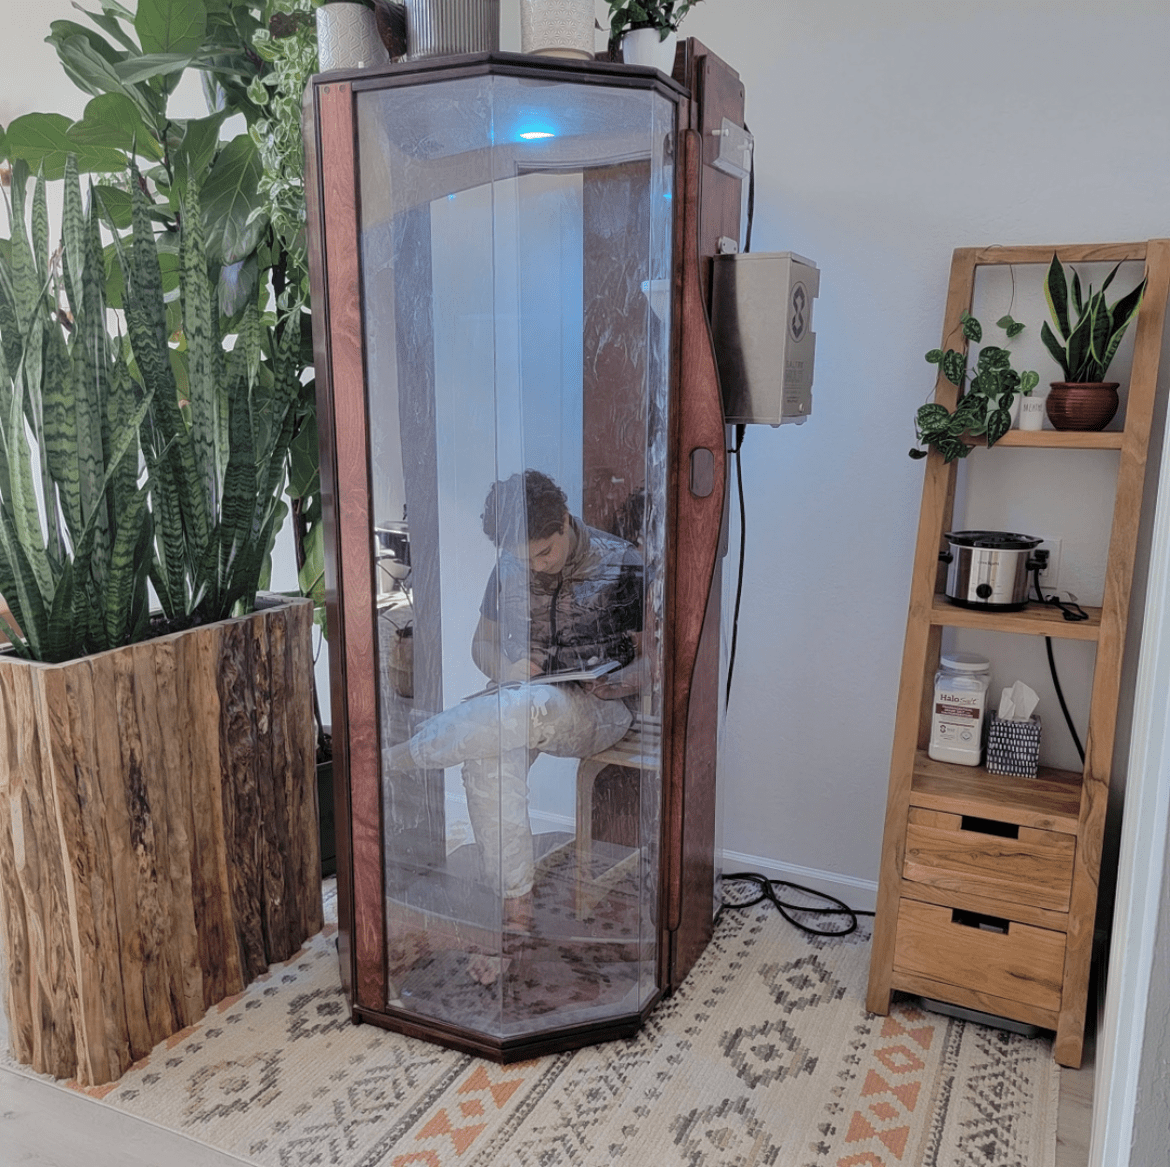 A customer using the Original SALT Booth for a salt therapy session at Bay Area Brain Spa in Albany, California.